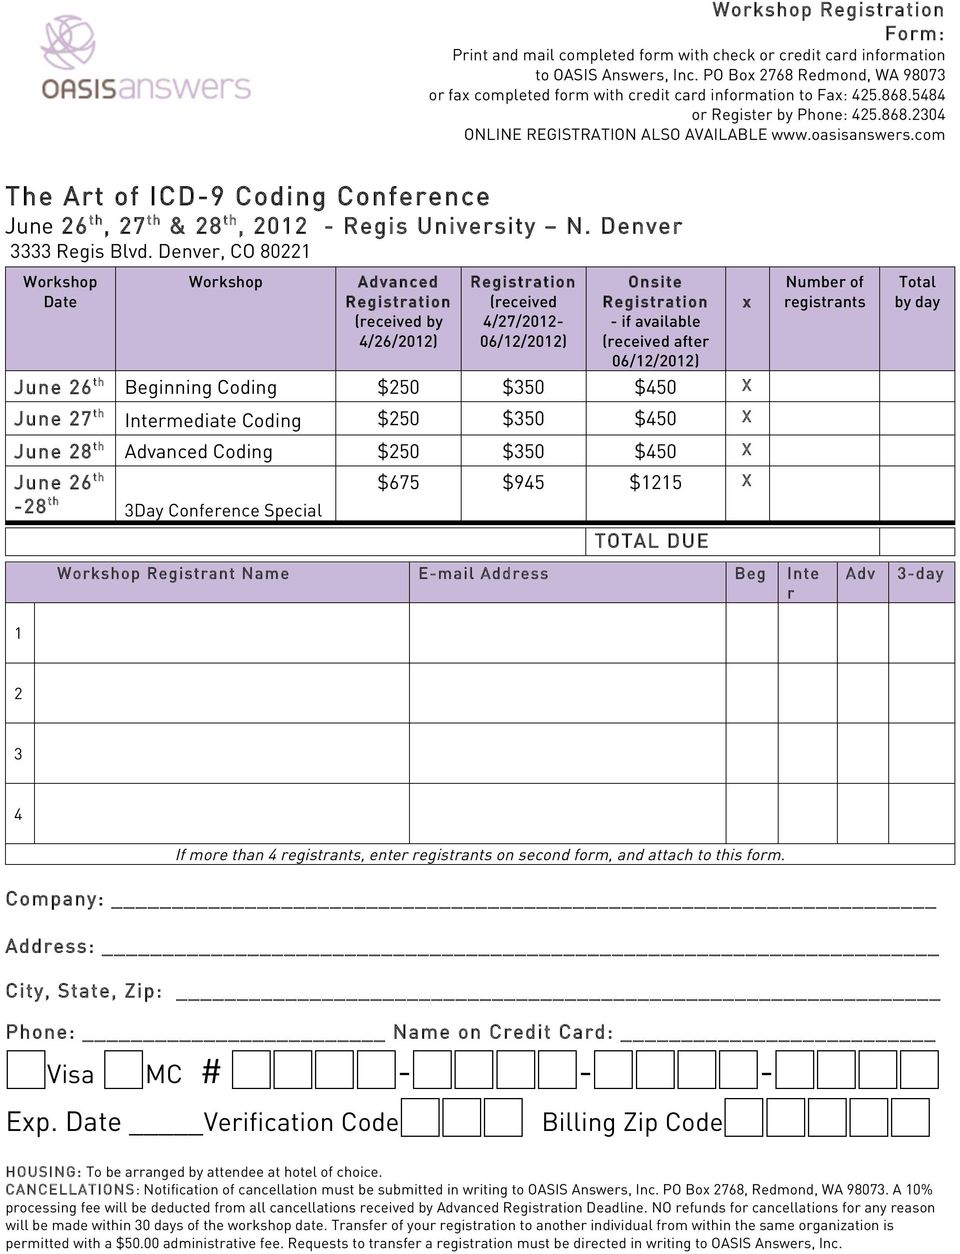 com The Art of ICD-9 Coding Conference June 26 th, 27 th & 28 th, 2012 - Regis University Denver, CO 80221 Workshop Date Workshop Advanced (received by 4/26/2012) (received 4/27/2012-06/12/2012)